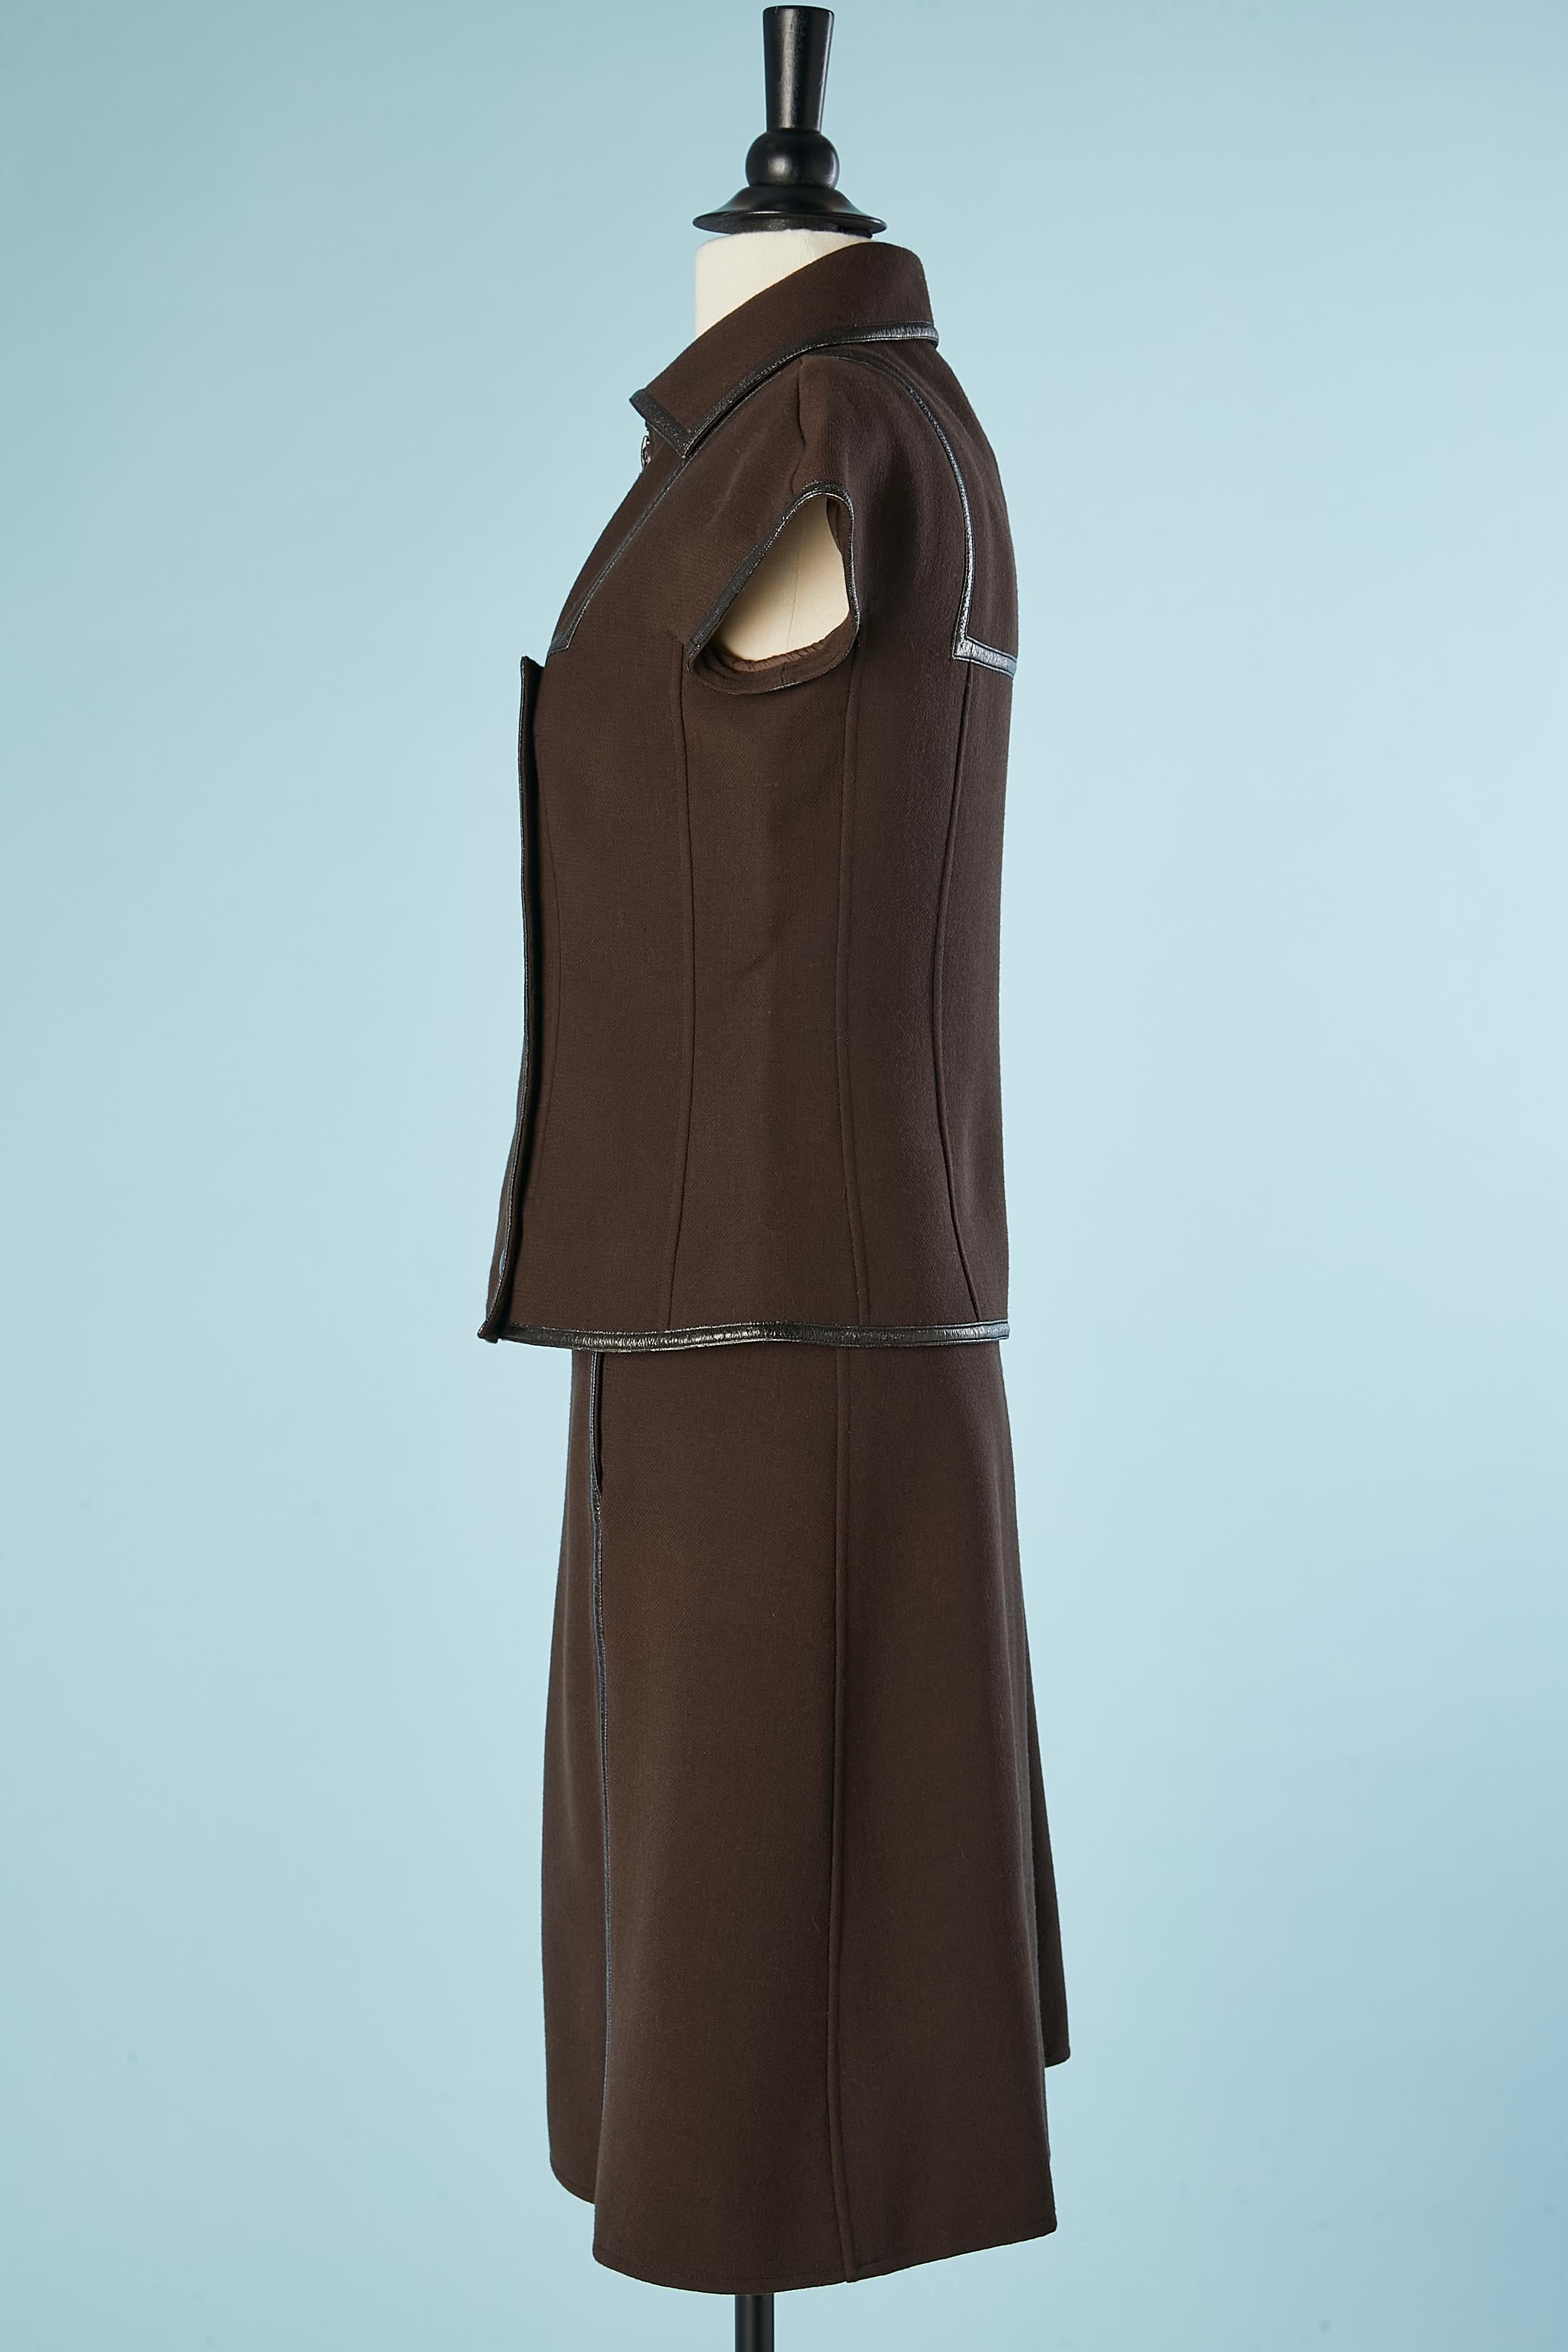 Brown wool skirt-suit and black piping Courrèges Paris Couture Future Circa 1970 In Good Condition For Sale In Saint-Ouen-Sur-Seine, FR